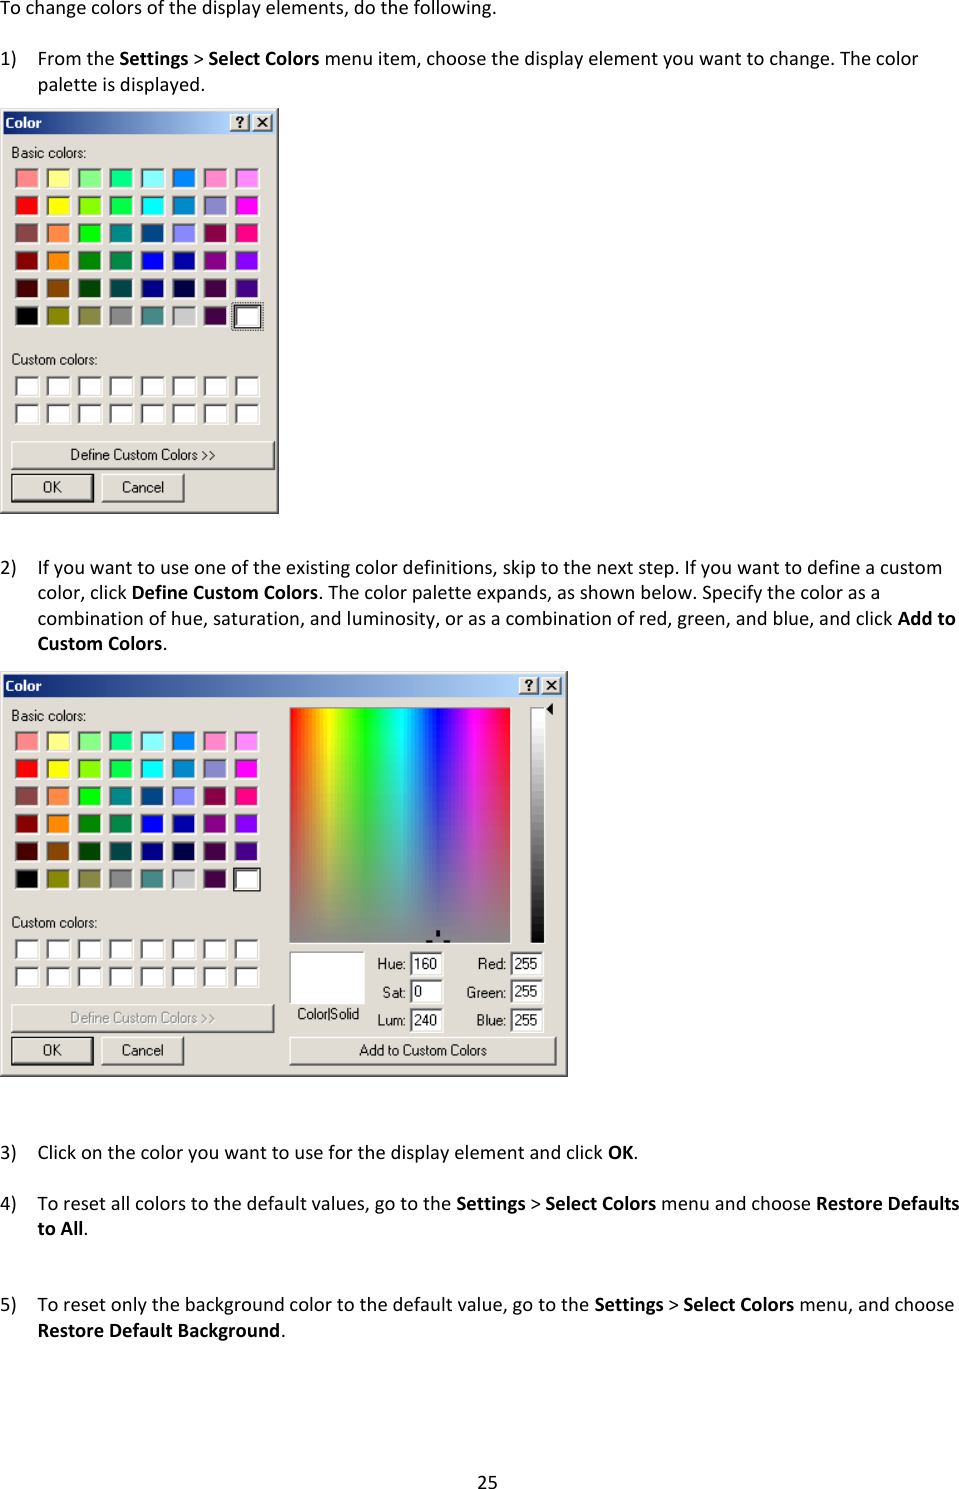   25 To change colors of the display elements, do the following.  1) From the Settings &gt; Select Colors menu item, choose the display element you want to change. The color palette is displayed.                   2) If you want to use one of the existing color definitions, skip to the next step. If you want to define a custom color, click Define Custom Colors. The color palette expands, as shown below. Specify the color as a combination of hue, saturation, and luminosity, or as a combination of red, green, and blue, and click Add to Custom Colors.                    3) Click on the color you want to use for the display element and click OK.  4) To reset all colors to the default values, go to the Settings &gt; Select Colors menu and choose Restore Defaults to All.   5) To reset only the background color to the default value, go to the Settings &gt; Select Colors menu, and choose Restore Default Background.    